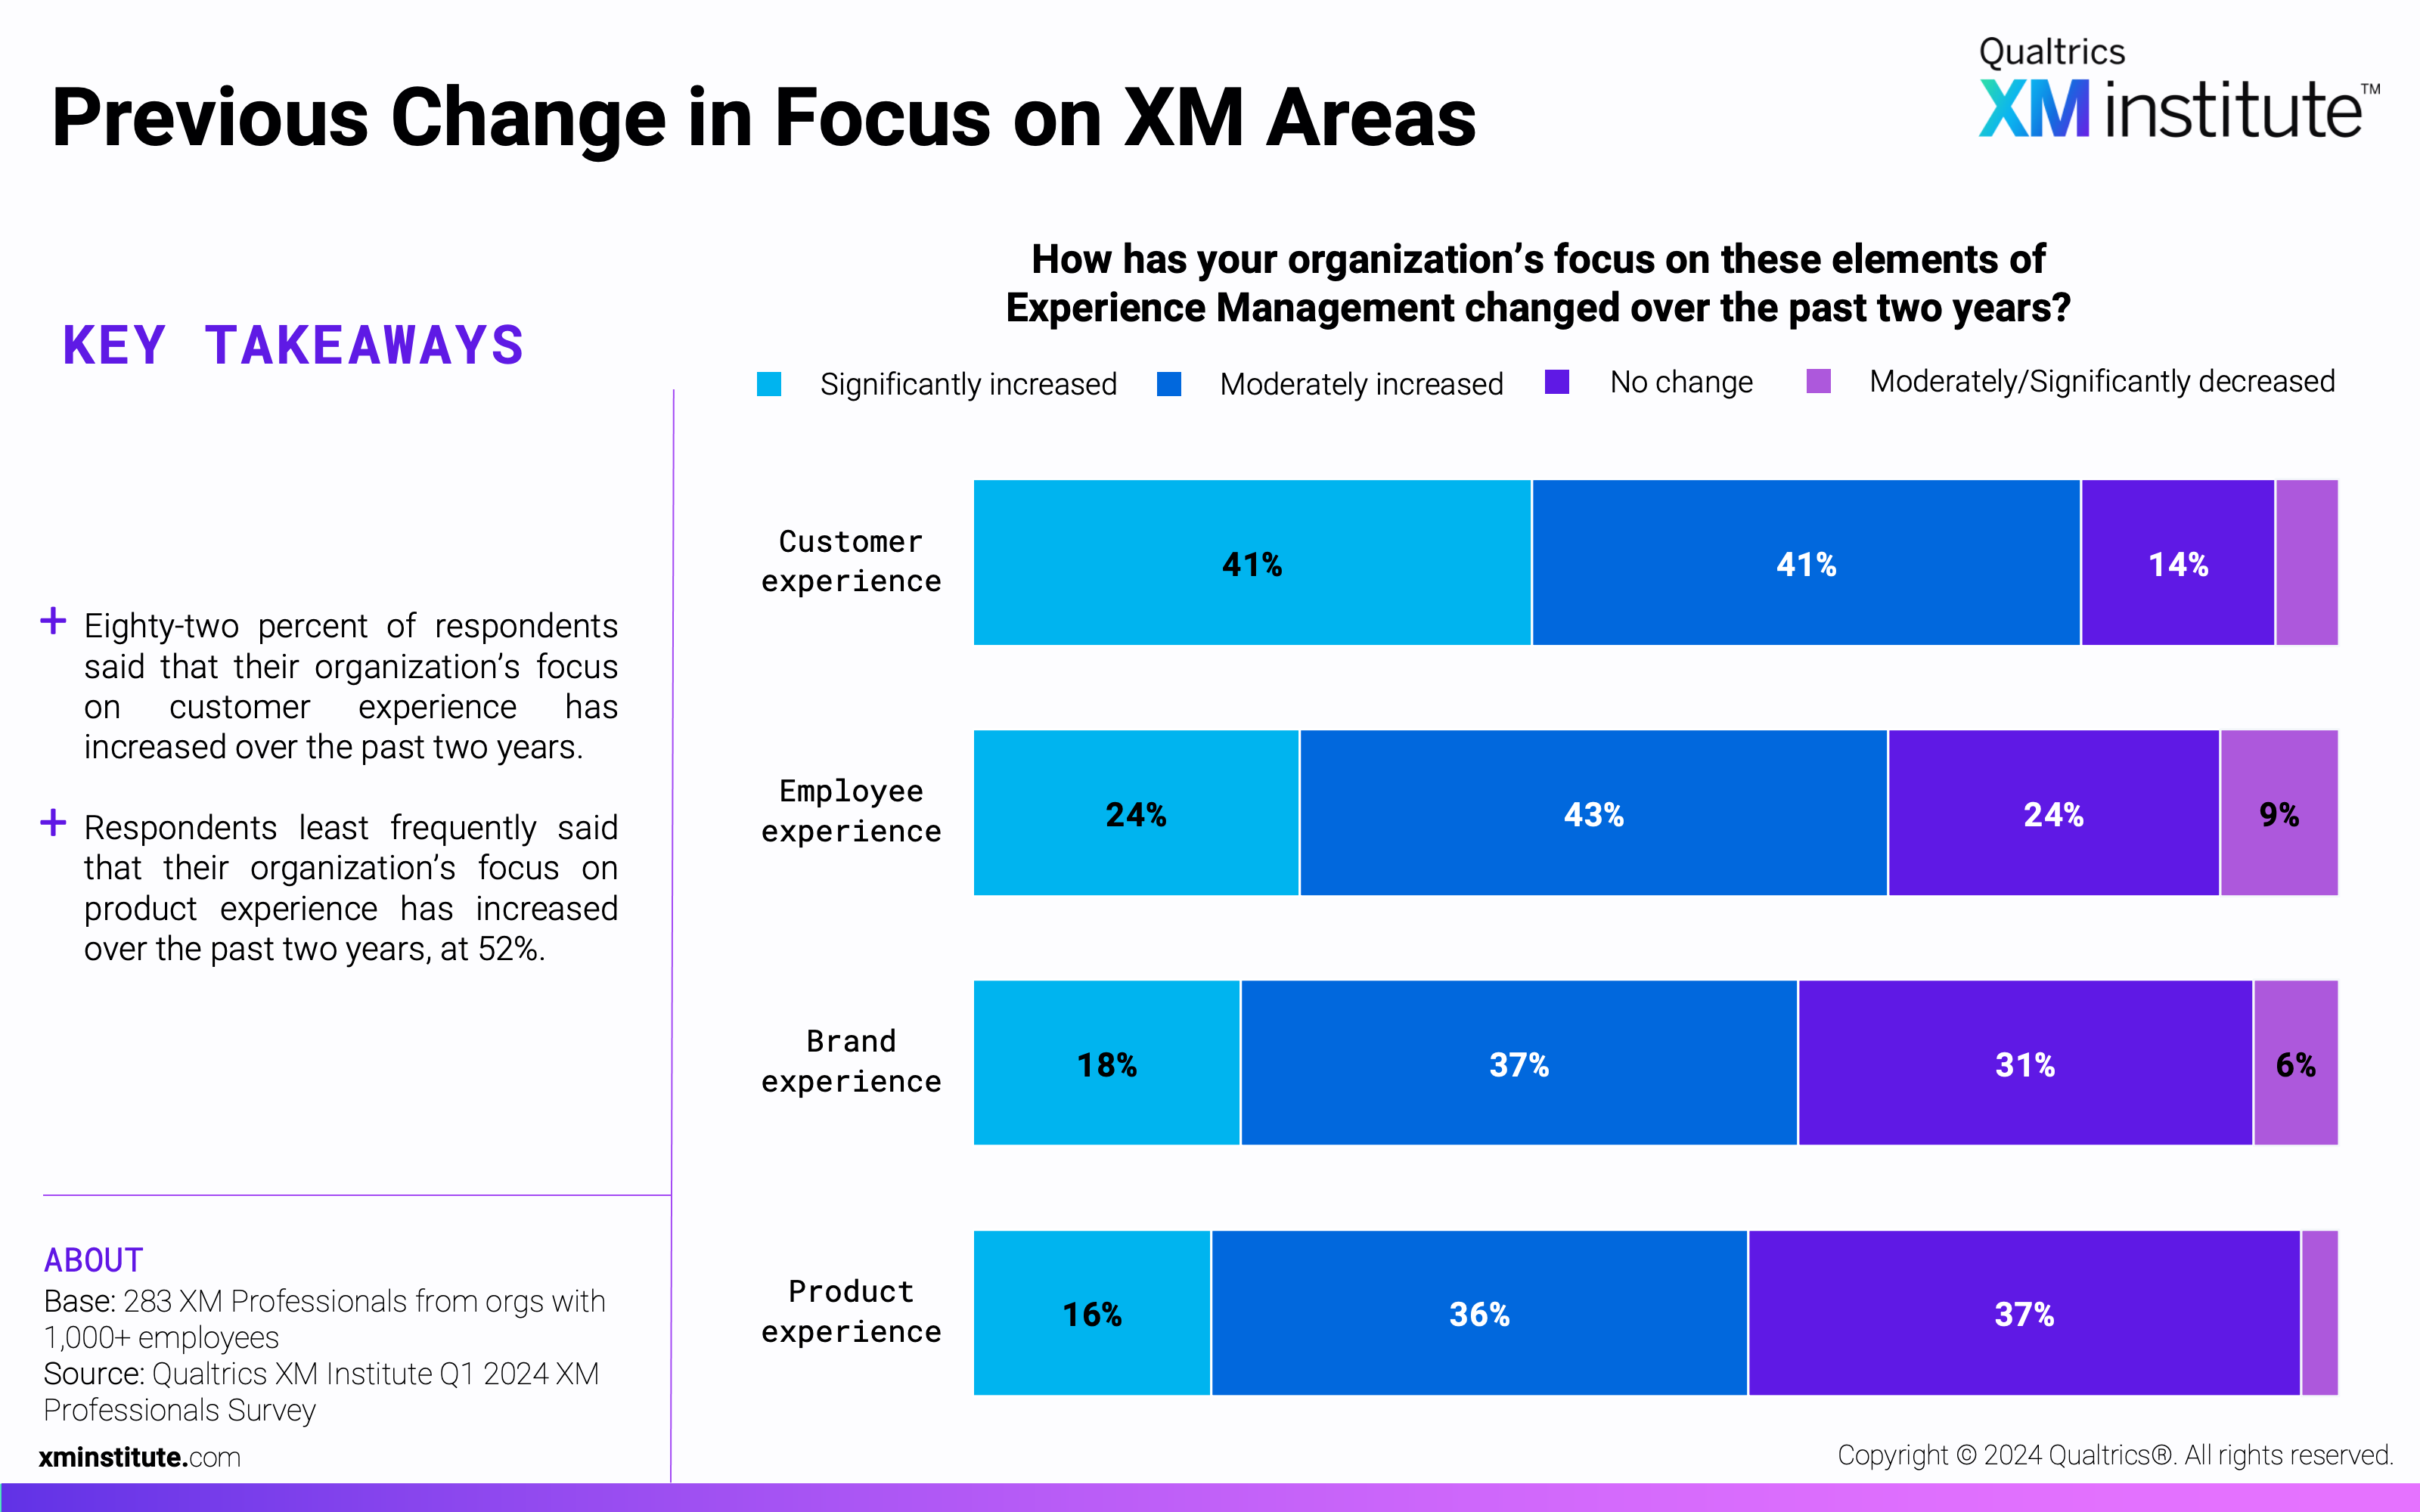 This chart shows how organizations' focus on CX, EX, PX, and BX have changed over the past two years. 